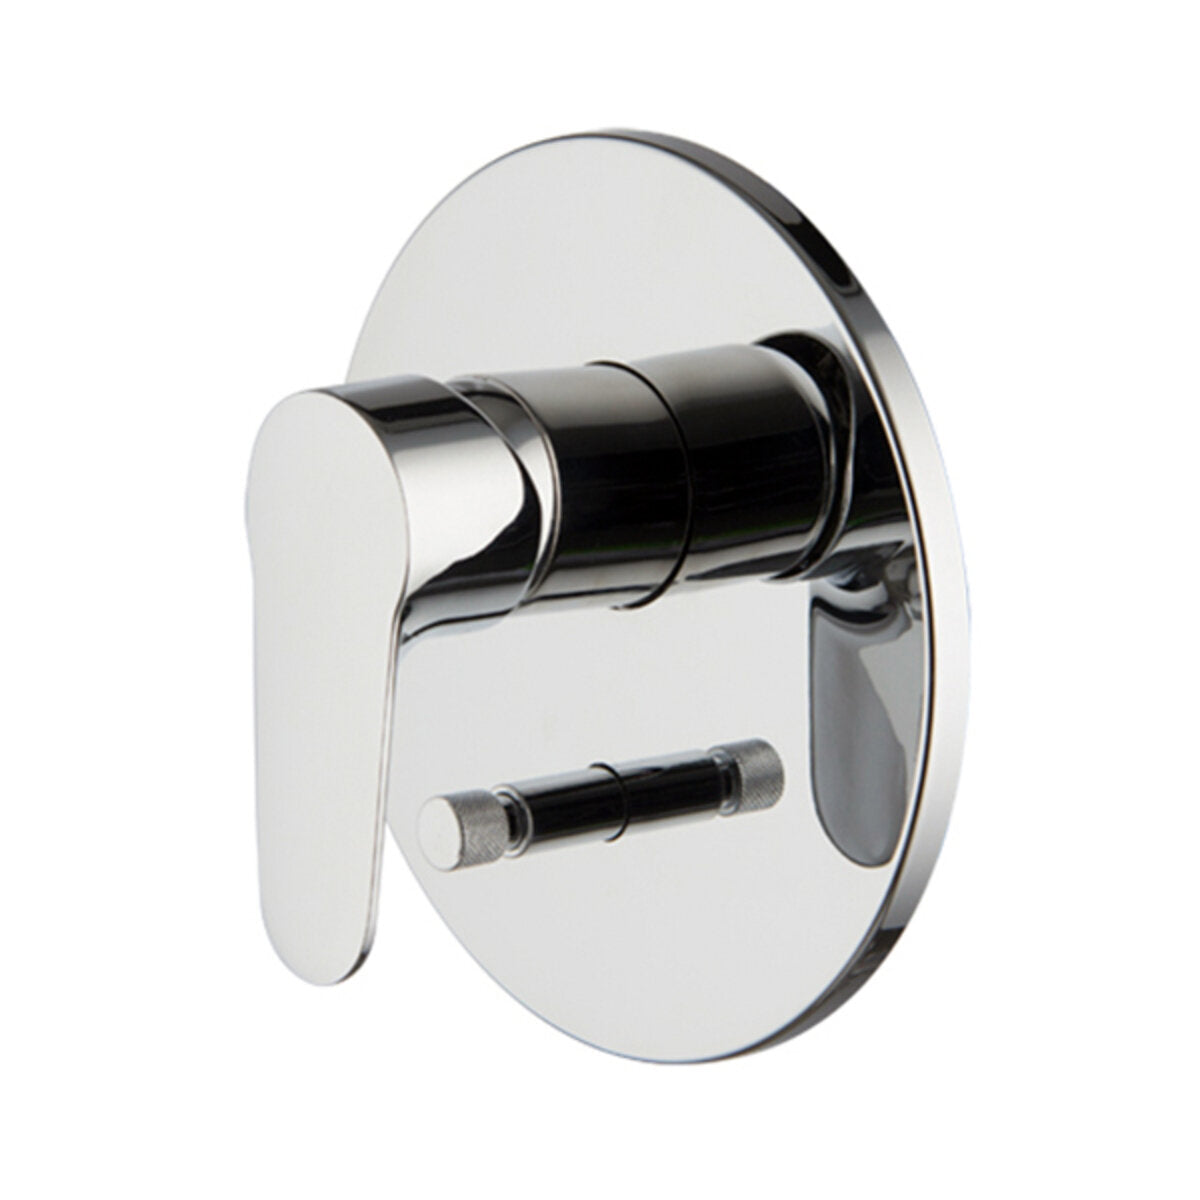 Fima Carlo Frattini series 22 built-in bath and shower mixer with two-way diverter only external part